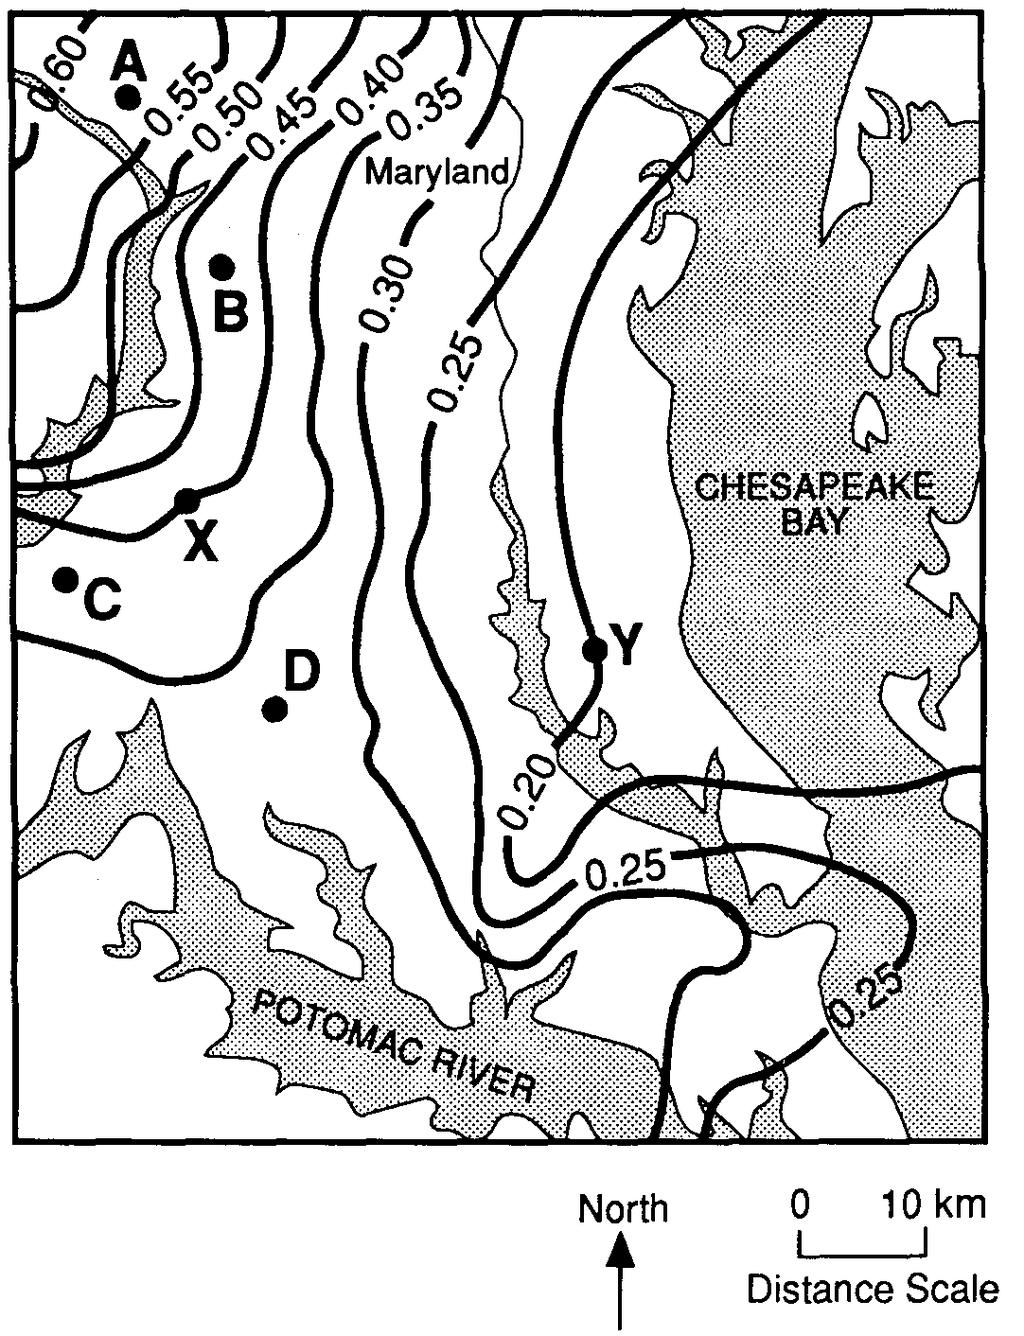 the Pleistocene Epoch. The field values represent particle diameters in centimeters. A) B) C) D) 47.